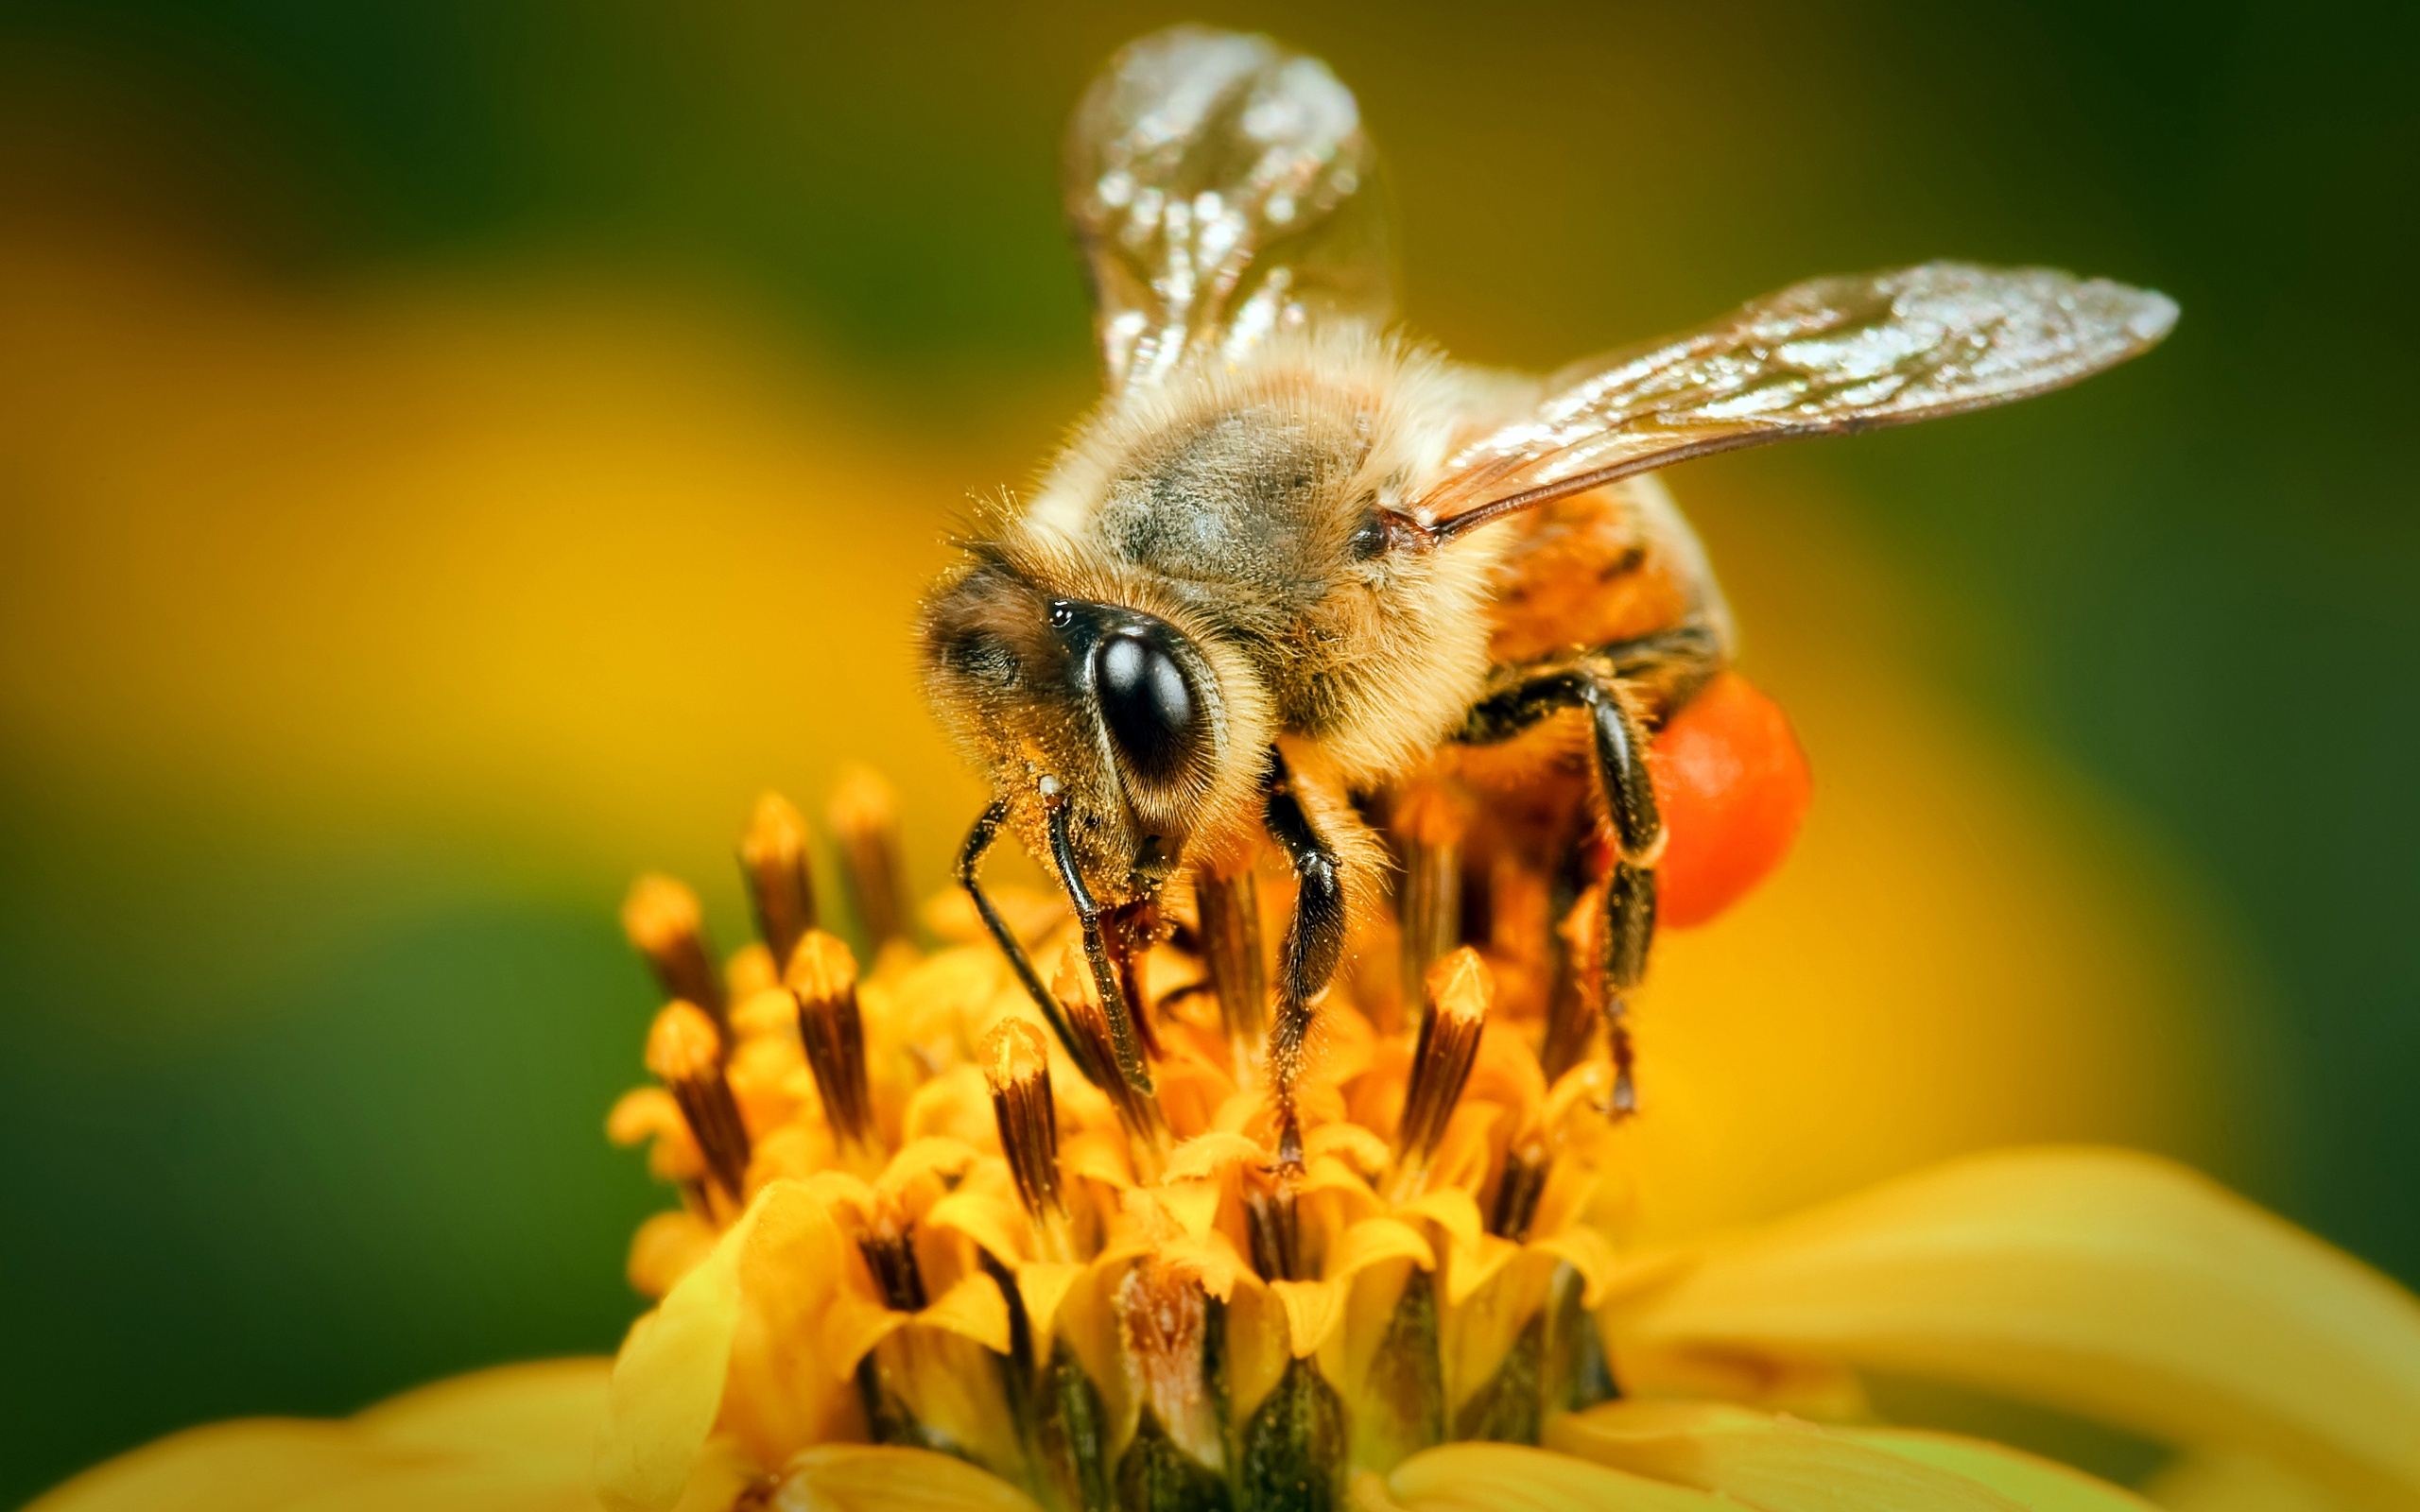 Bee: The primary insect pollinator of agricultural plants in most of the country. 2560x1600 HD Wallpaper.